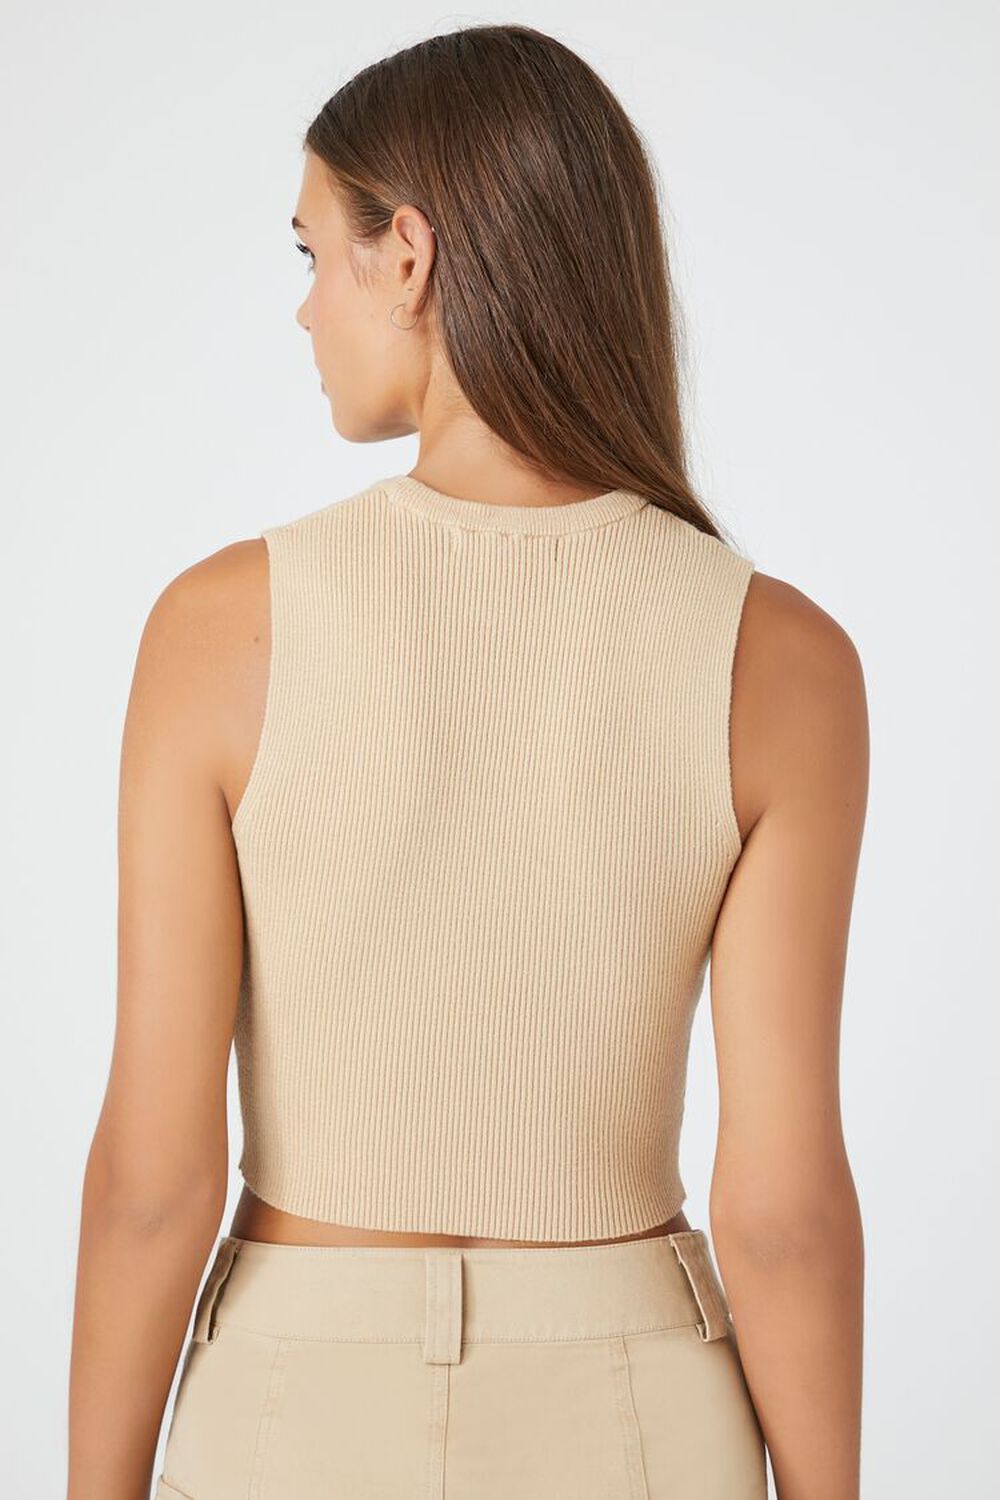 WARM SAND Sweater-Knit Cropped Tank Top, image 3